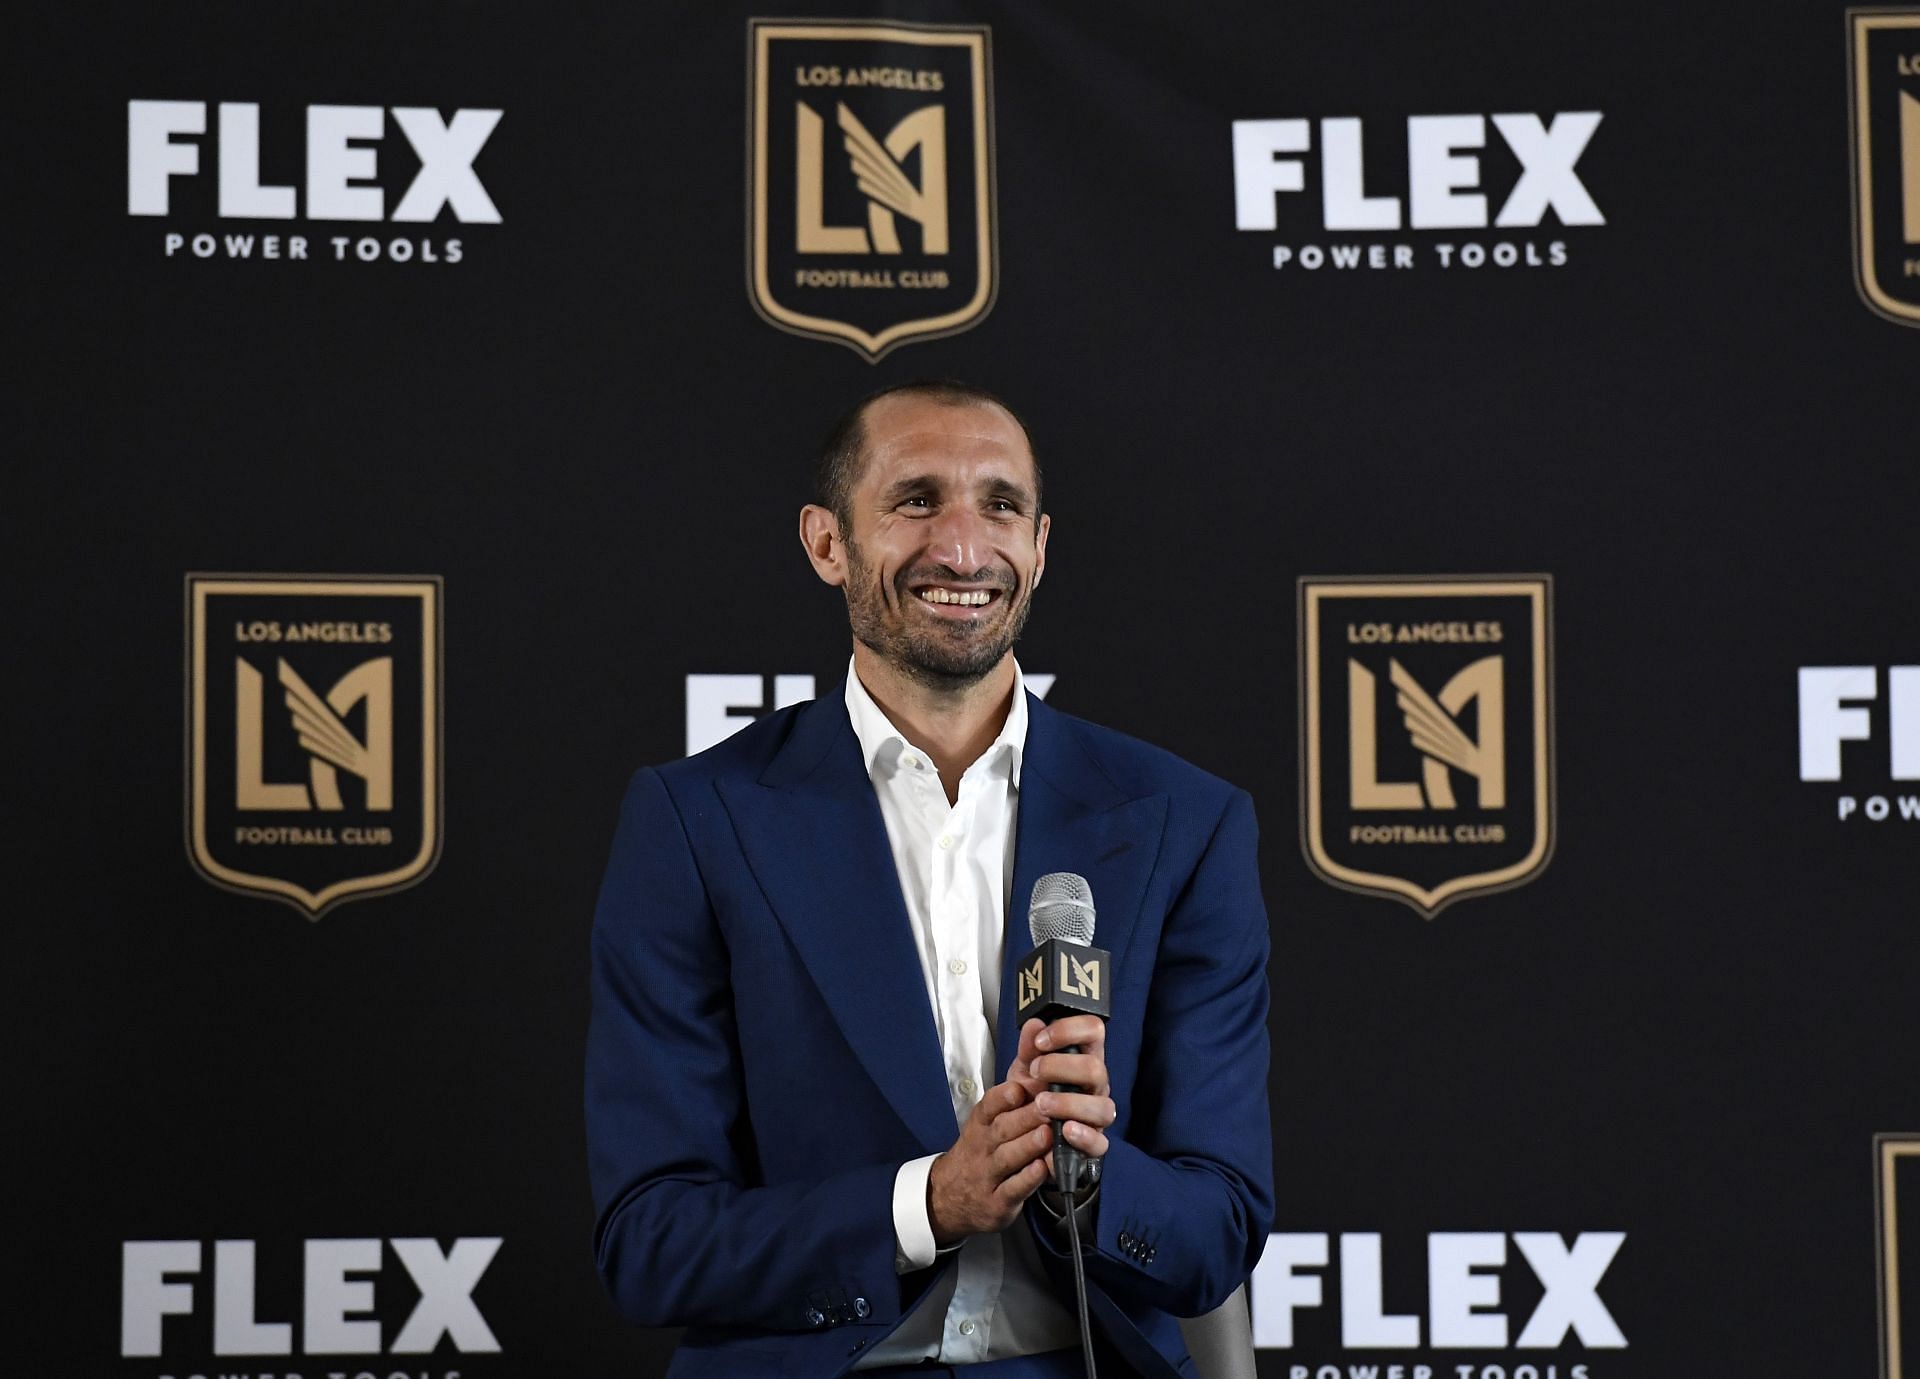 Giorgio Chiellini currently plays in the MLS